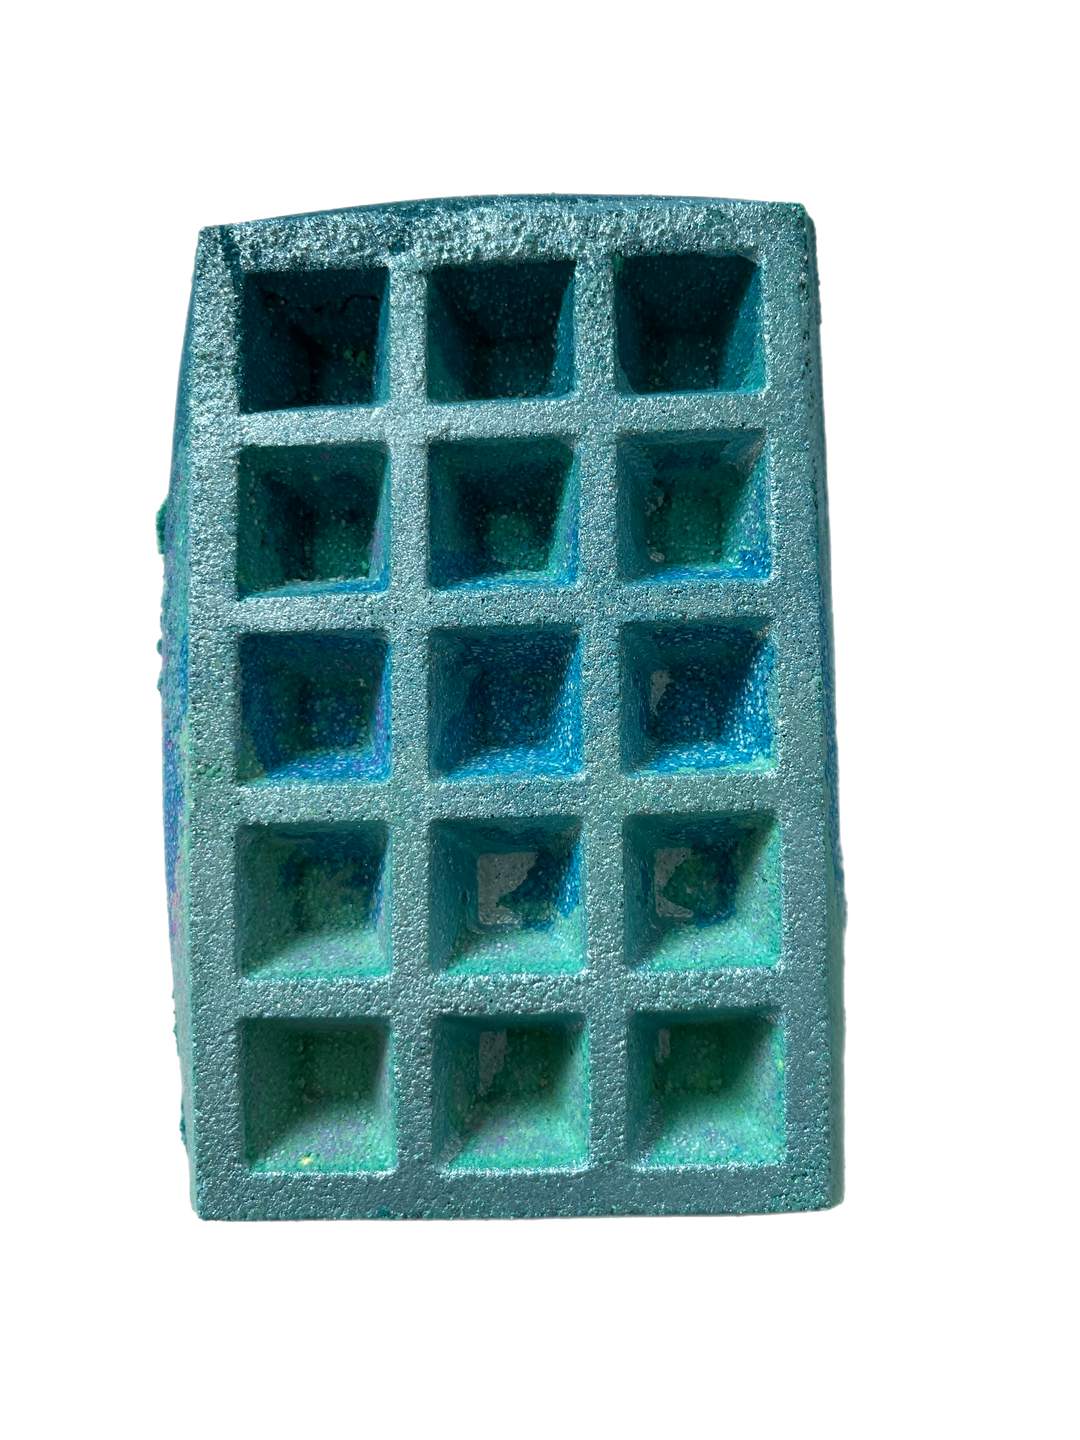 virgo waffle bath bomb in greens with painted green biodegradable glitter 